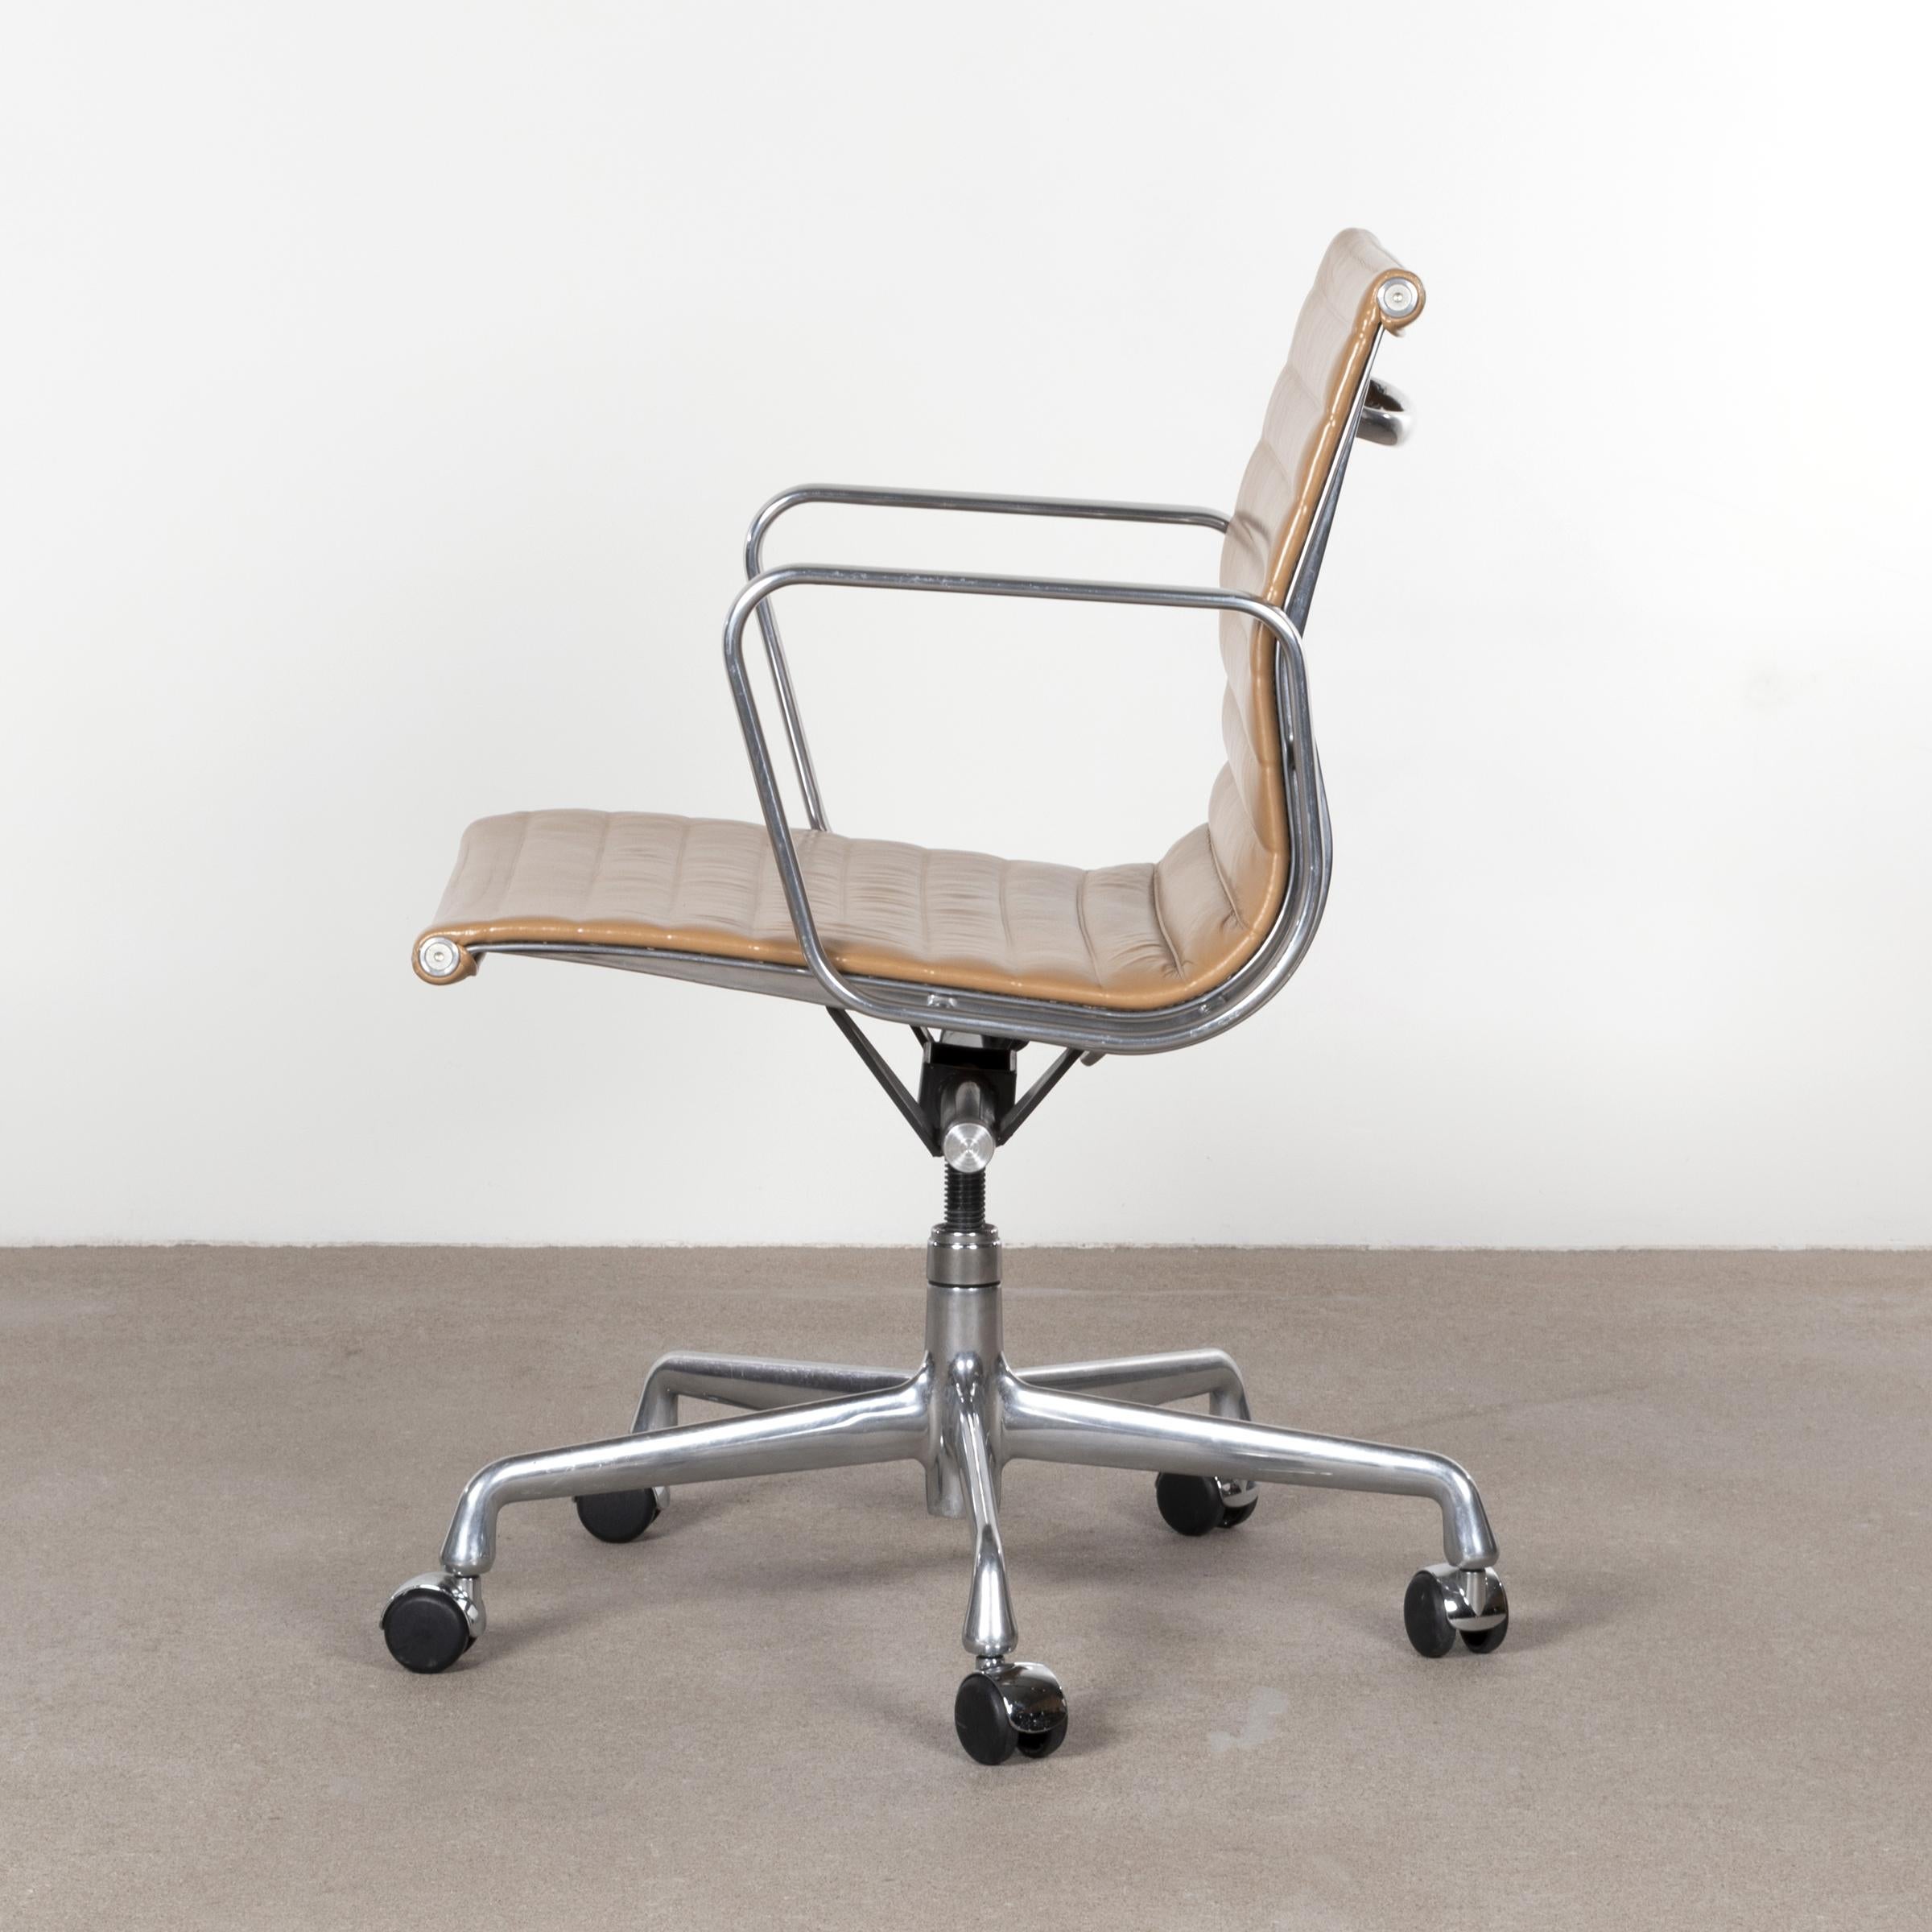 -- Privete listing for Louise, LA --

Eames EA335 management office chair in cognac leather with five-star base, spindle and tilt-swivel mechanism. Good original condition signed with manufacturer's label. 